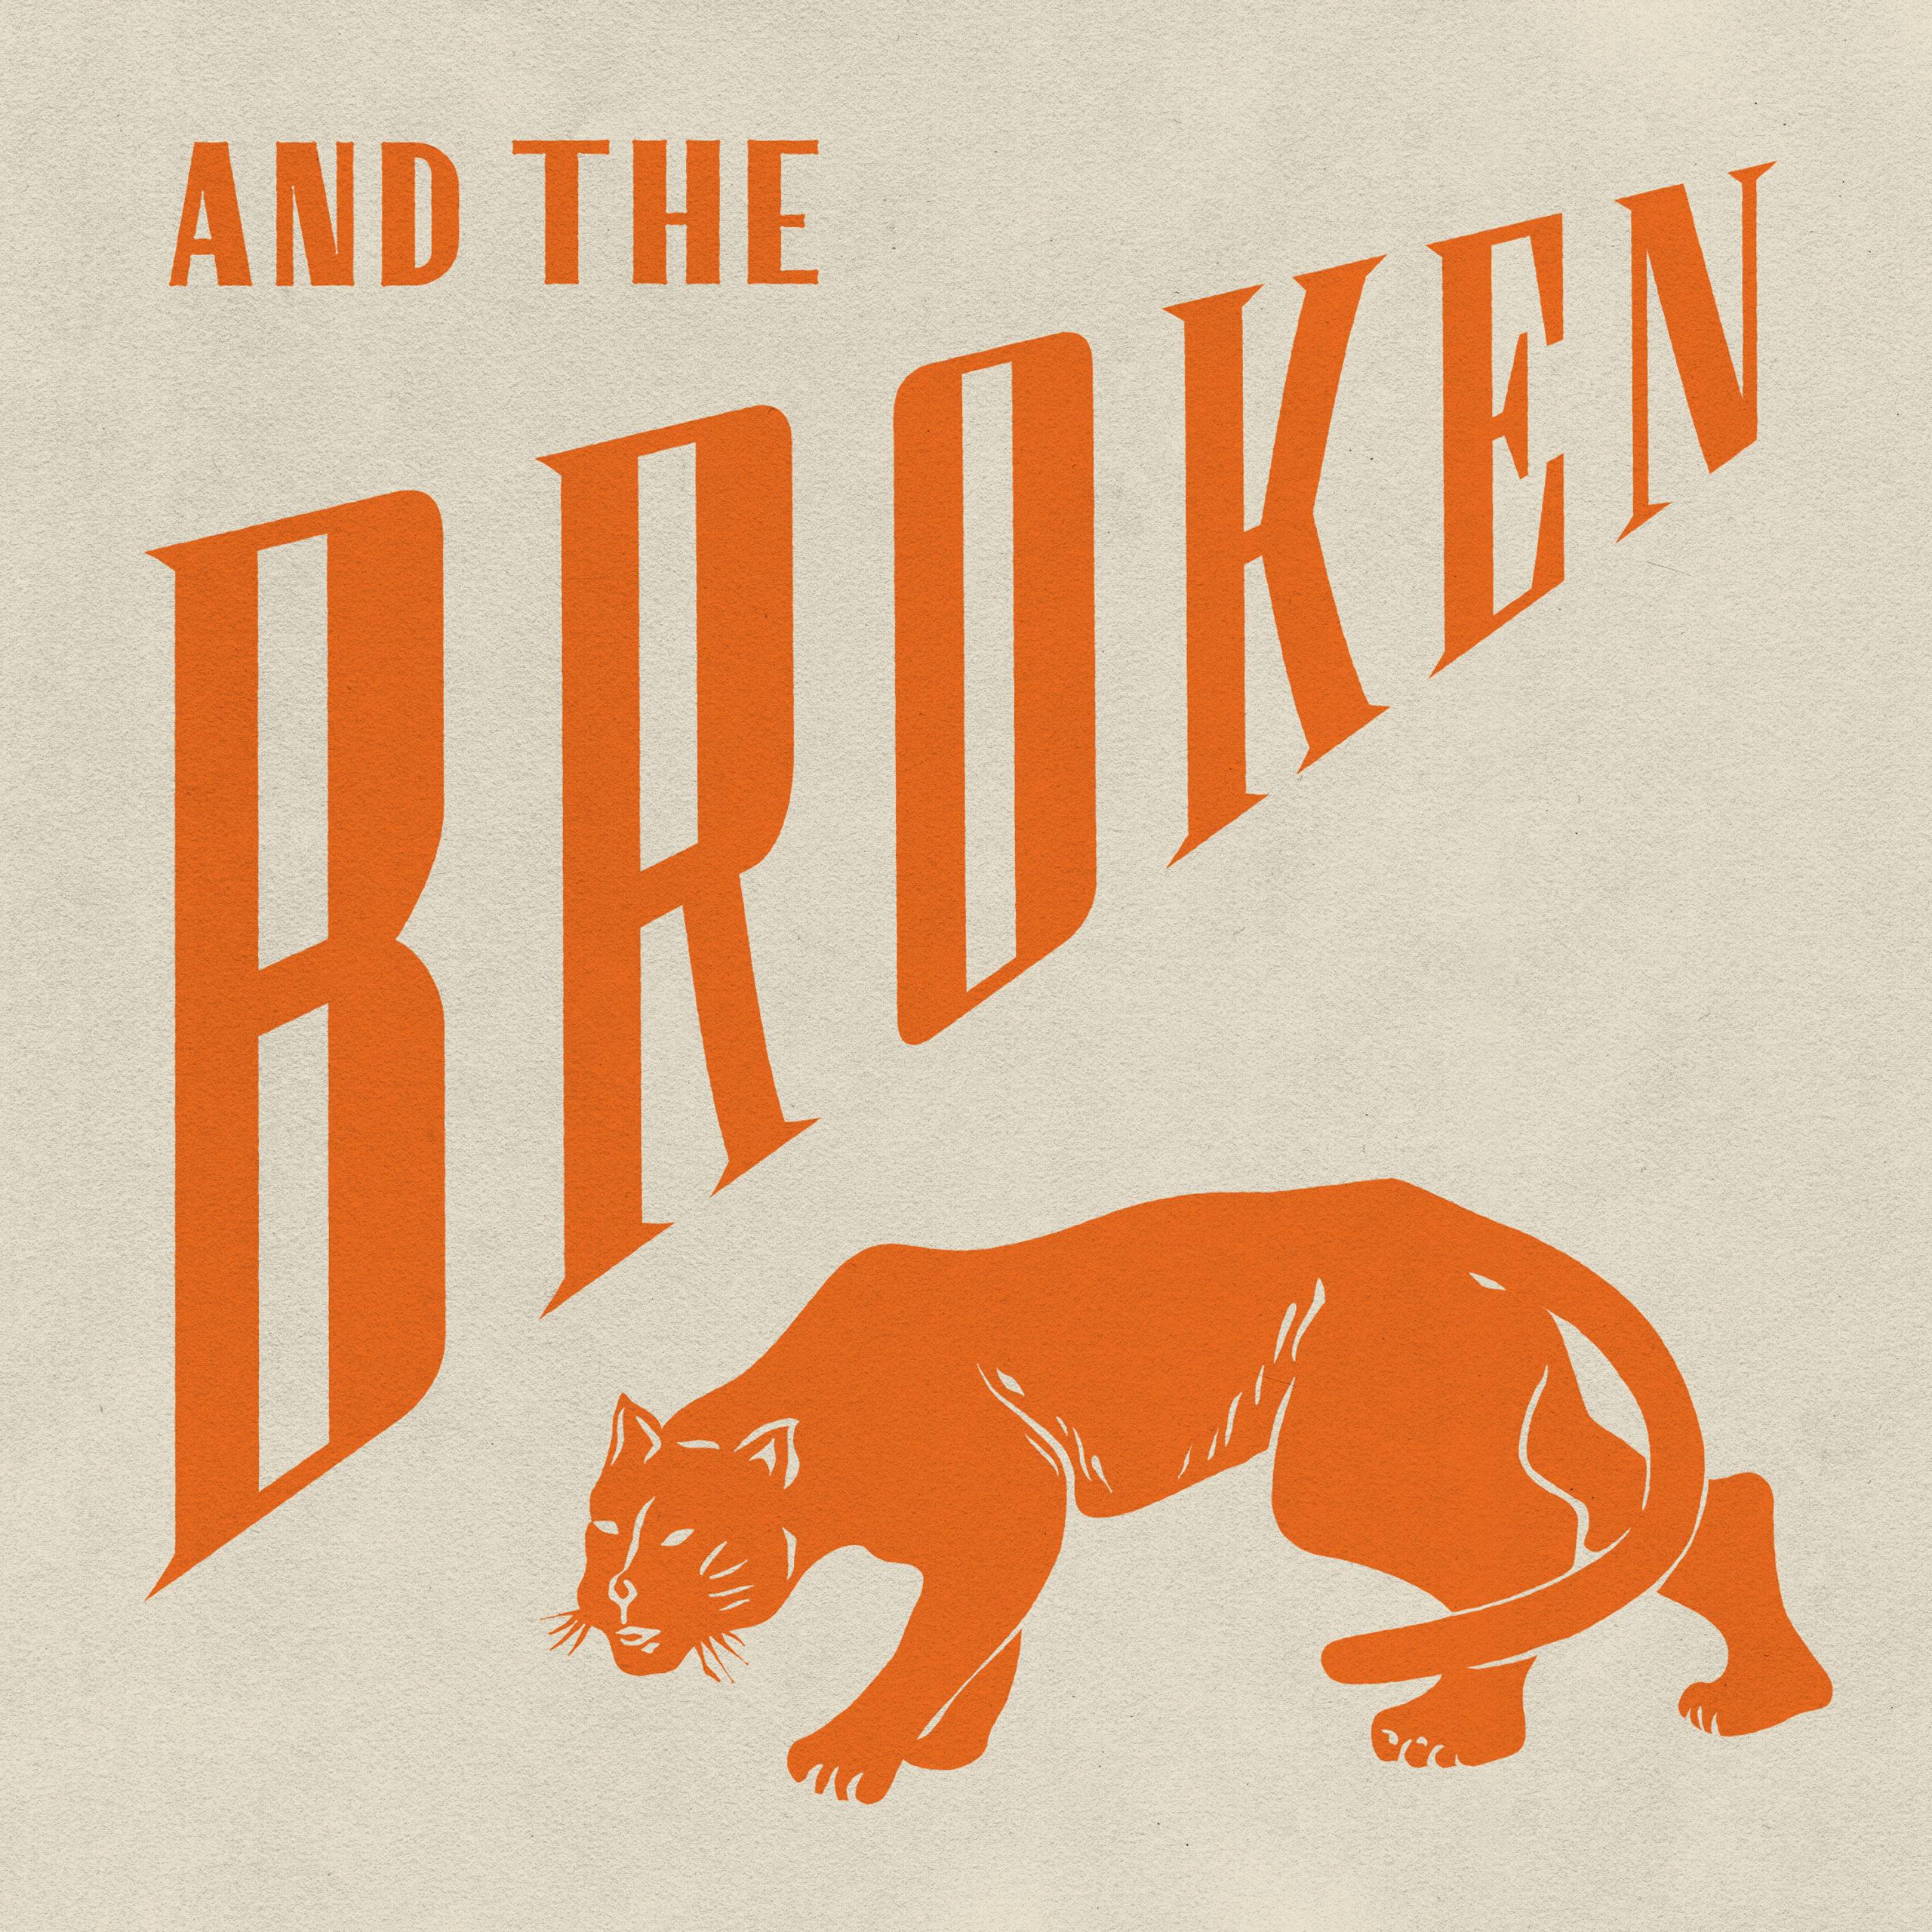 The band And The Broken releases new EP Red